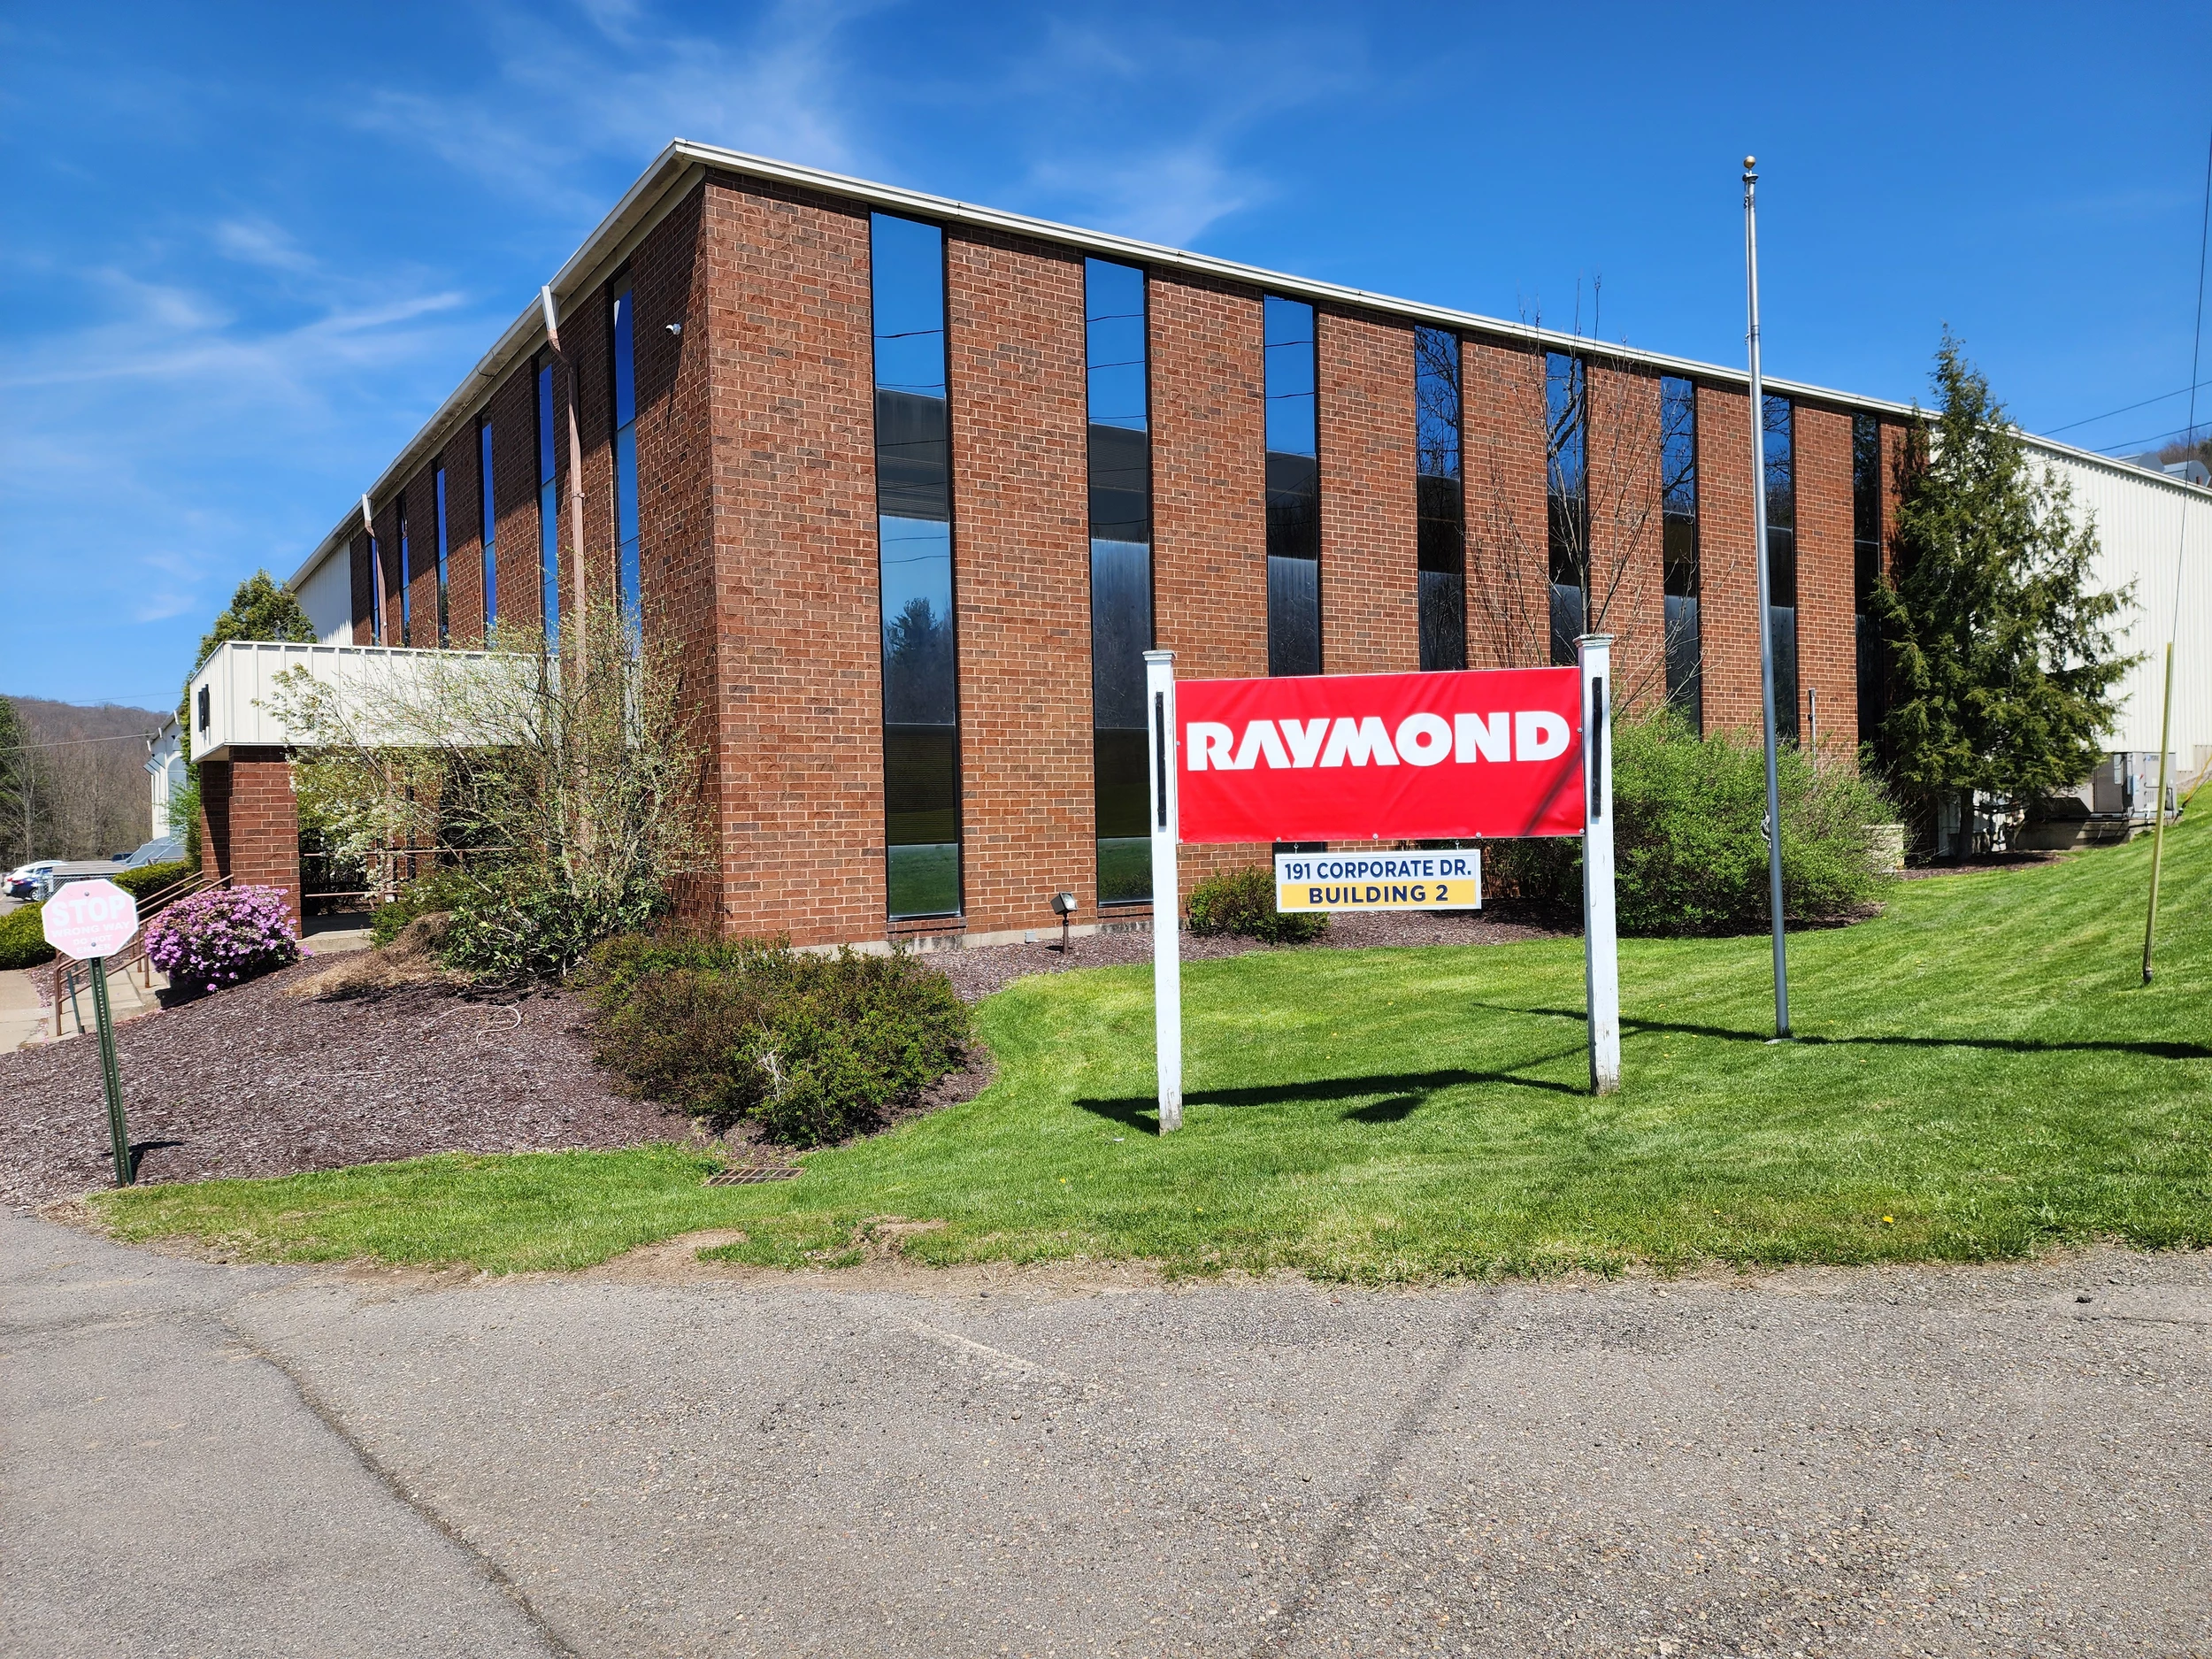 This building at 191 Corporate Drive in Kirkwood was recently purchased by Raymond Corporation. (Photo: Bob Joseph/WNBF News)